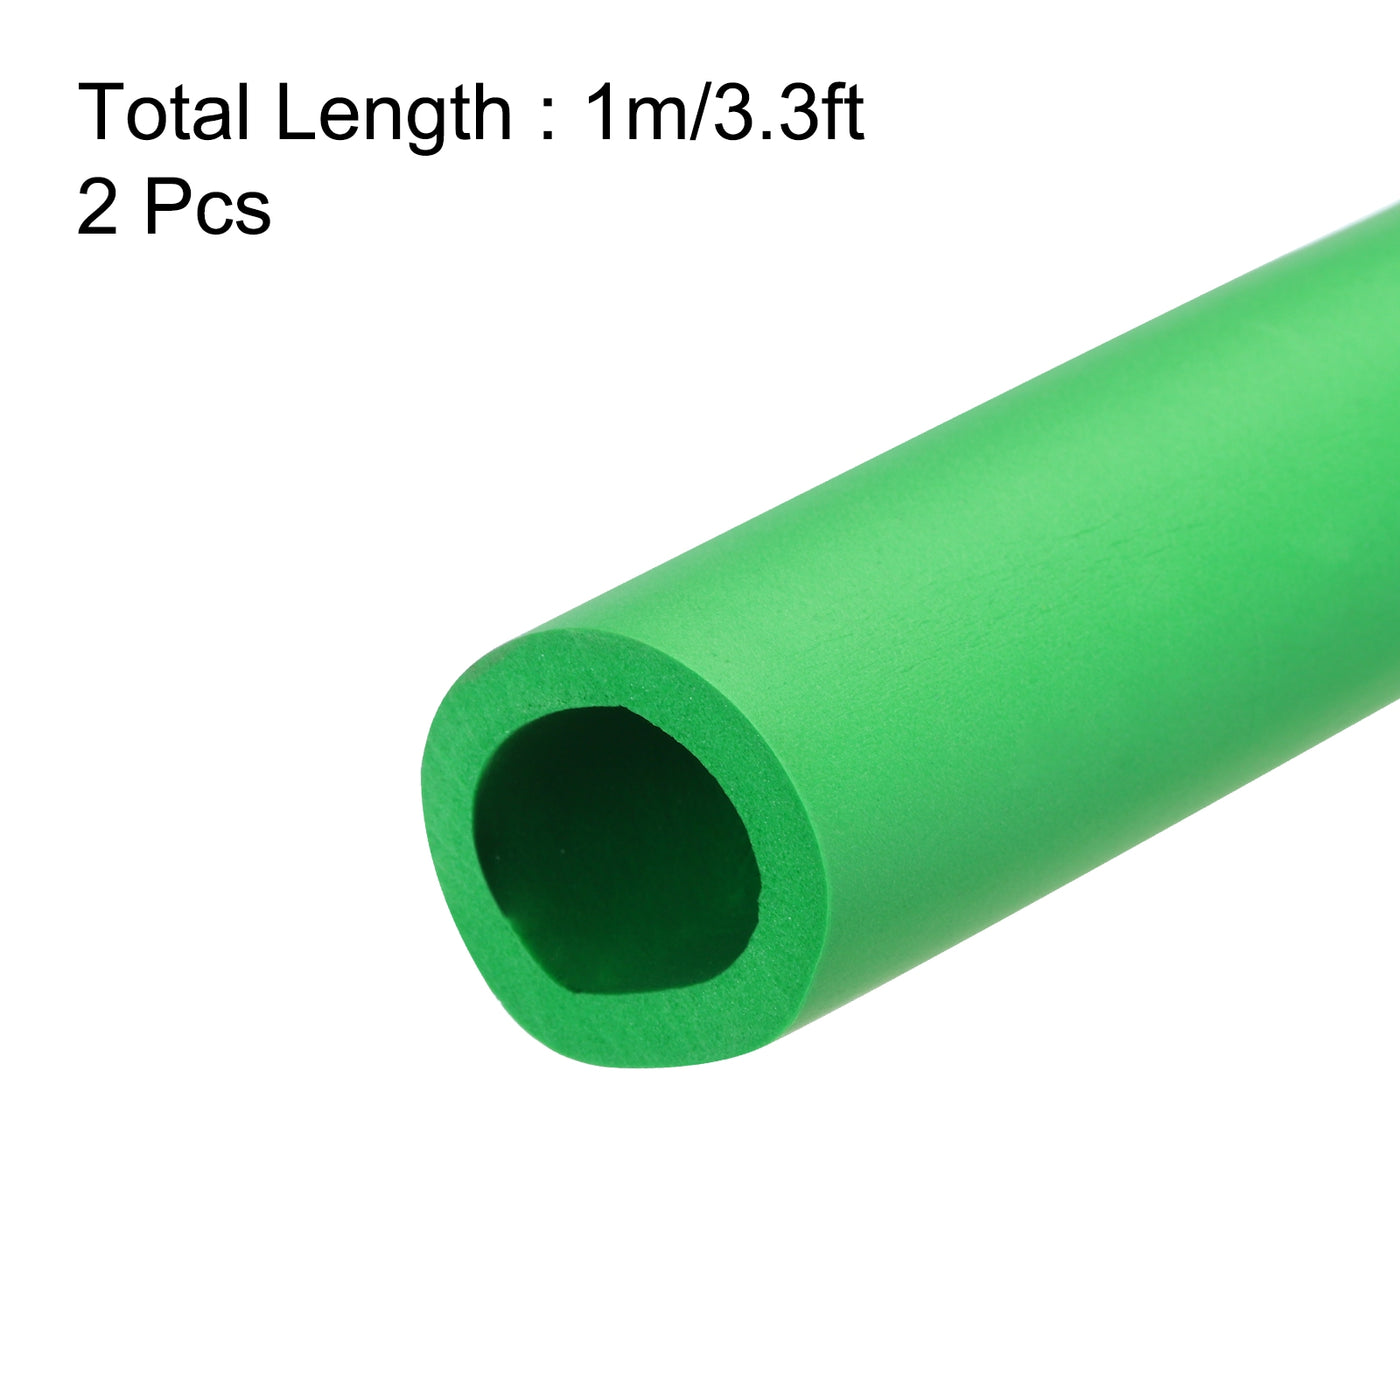 uxcell Uxcell 2pcs 3.3ft Pipe Insulation Tube 7/8 Inch(22mm) ID 32mm OD Foam Tubing for Handle Grip Support, Green